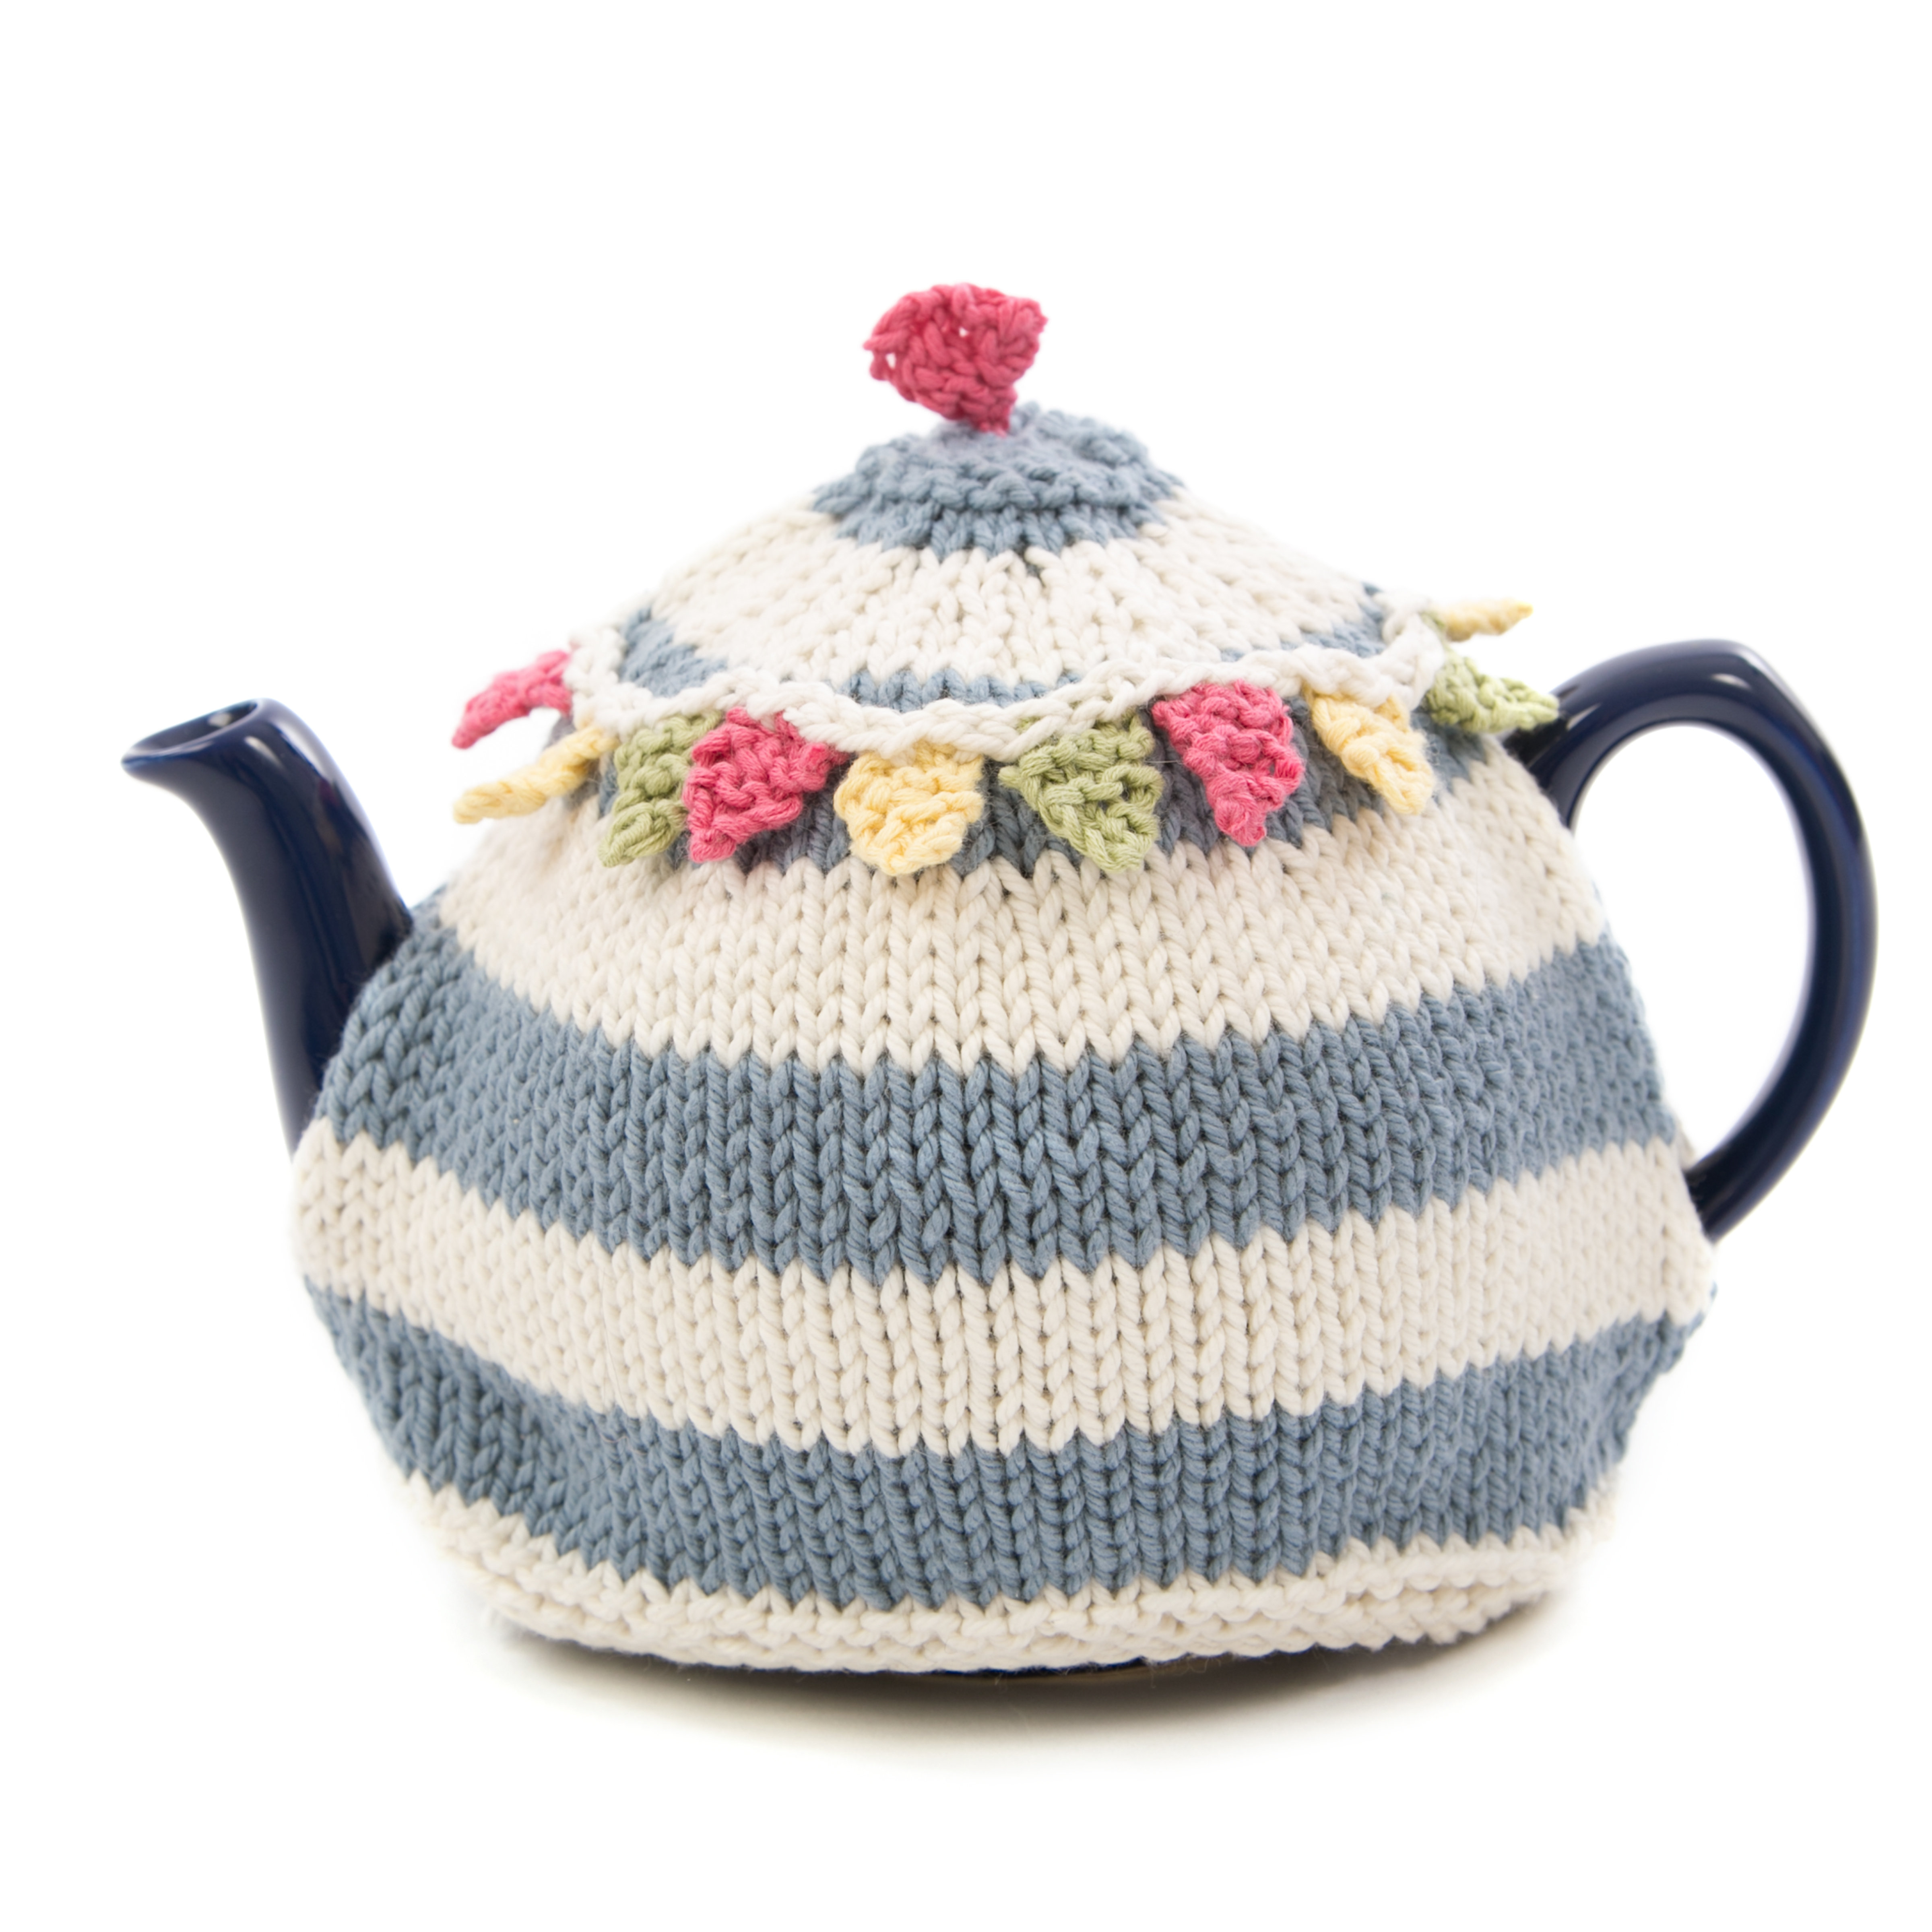 Tea Cosy Patterns To Knit Summer Bunting Tea Cosy